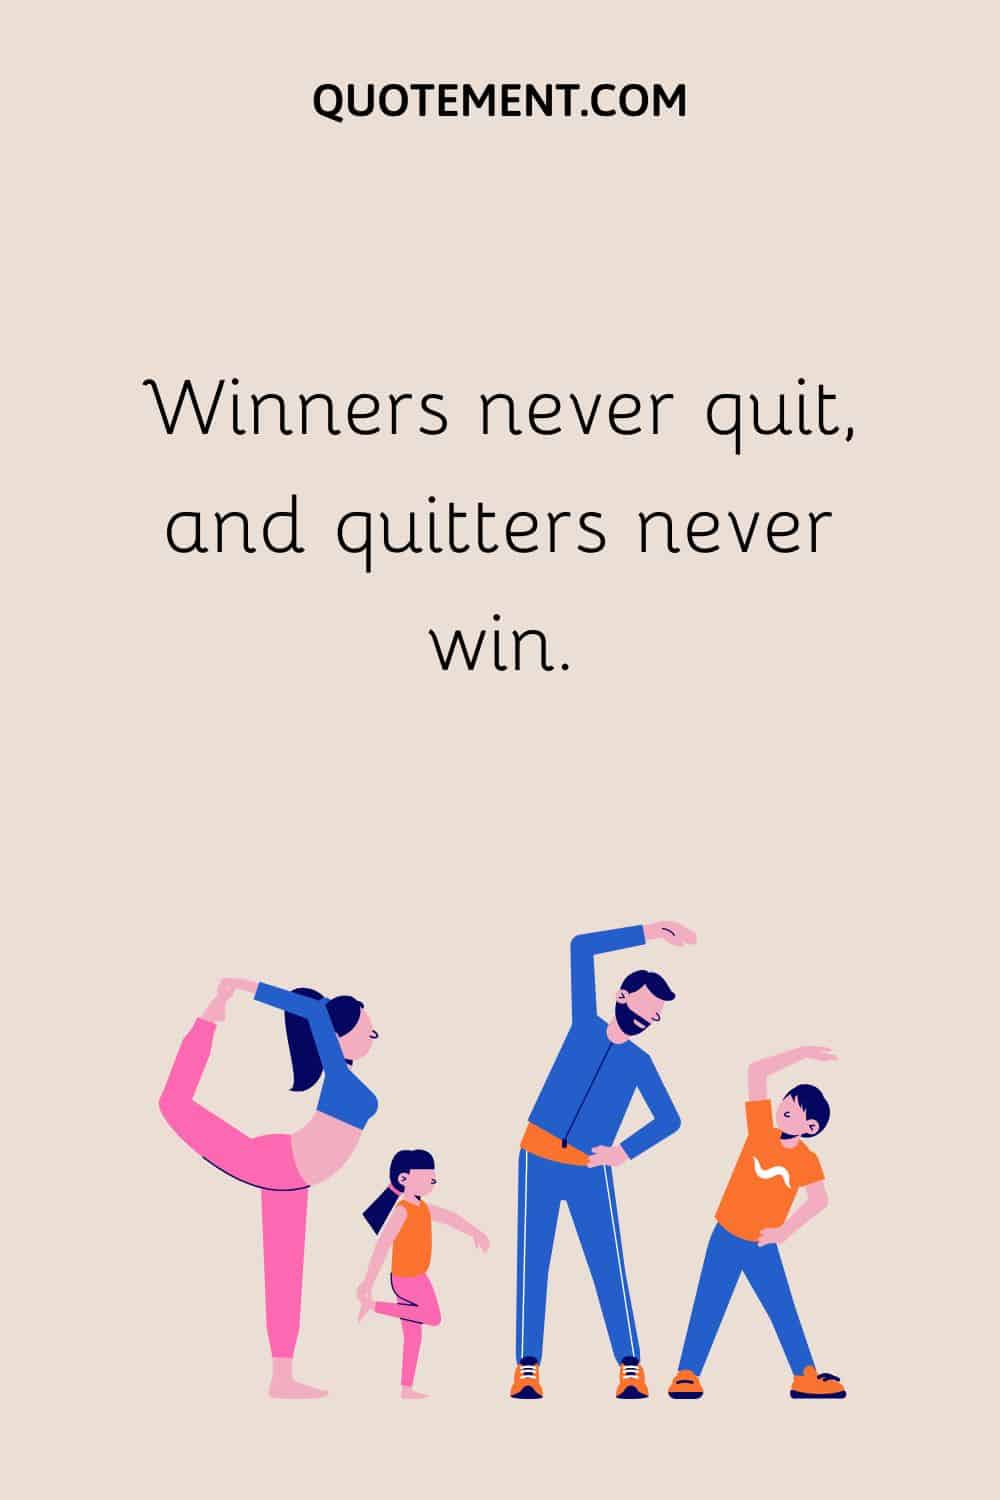 Winners never quit, and quitters never win